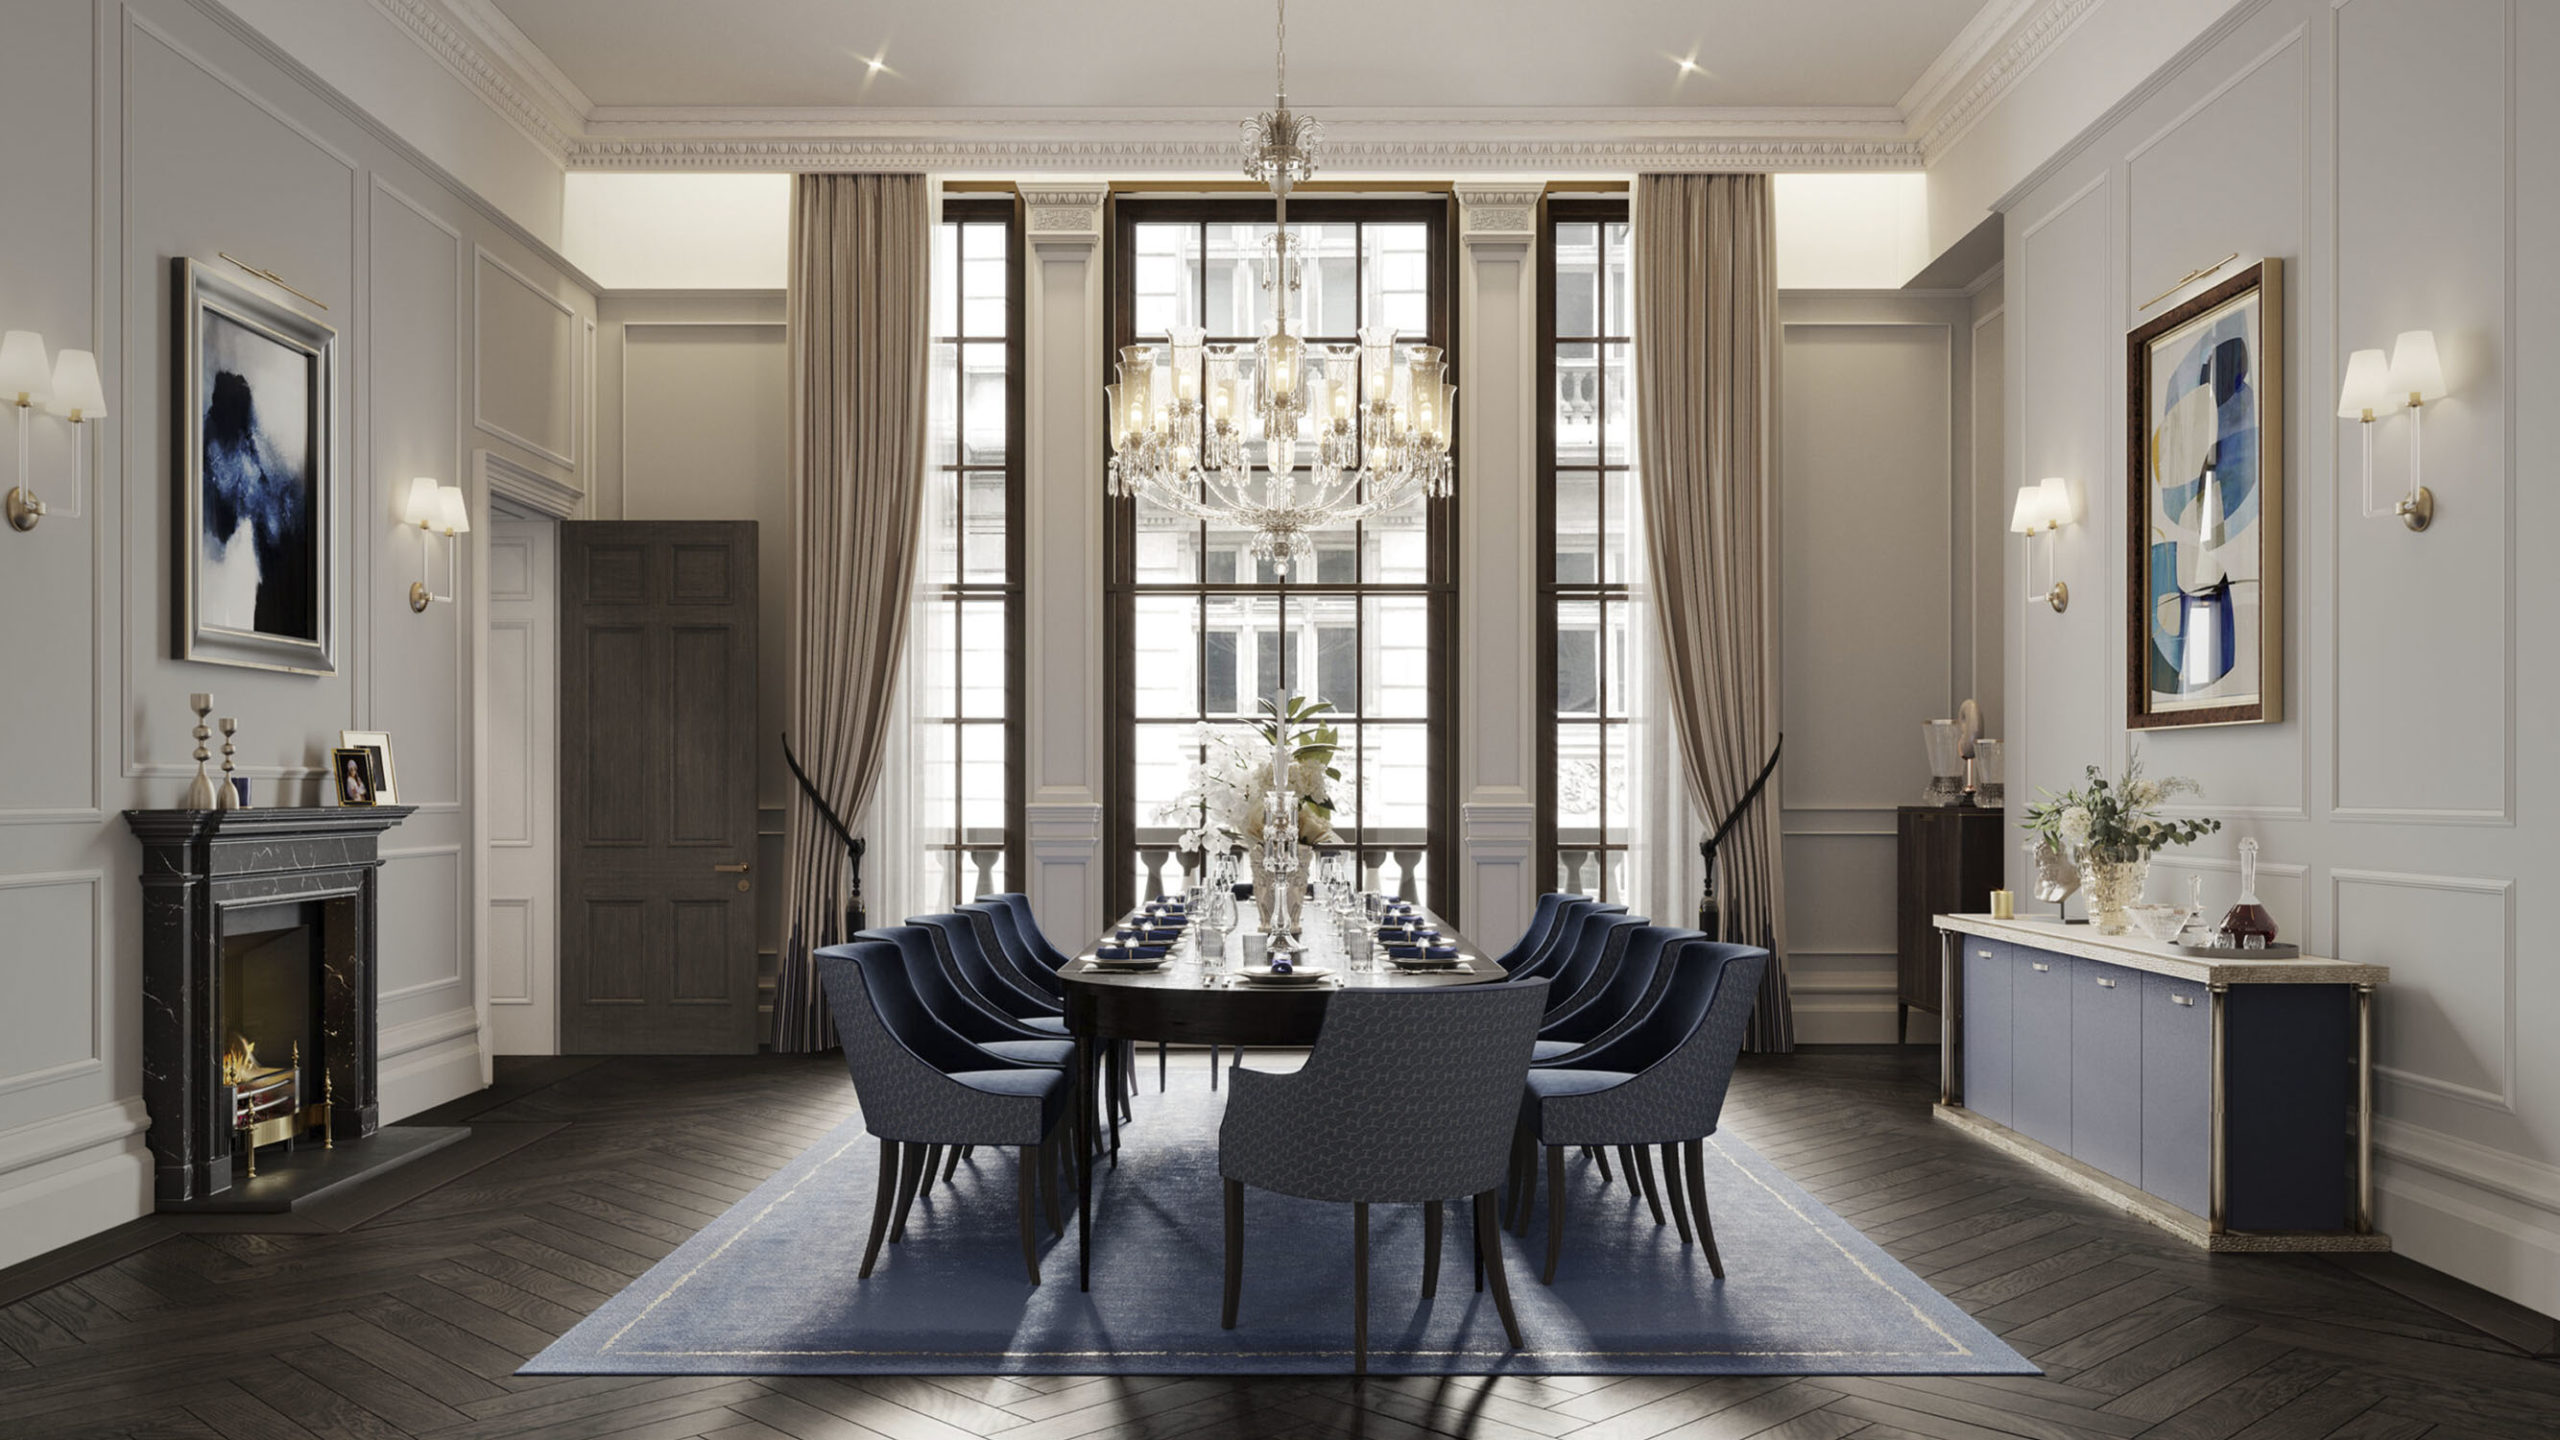 The OWO Residences Dining Room